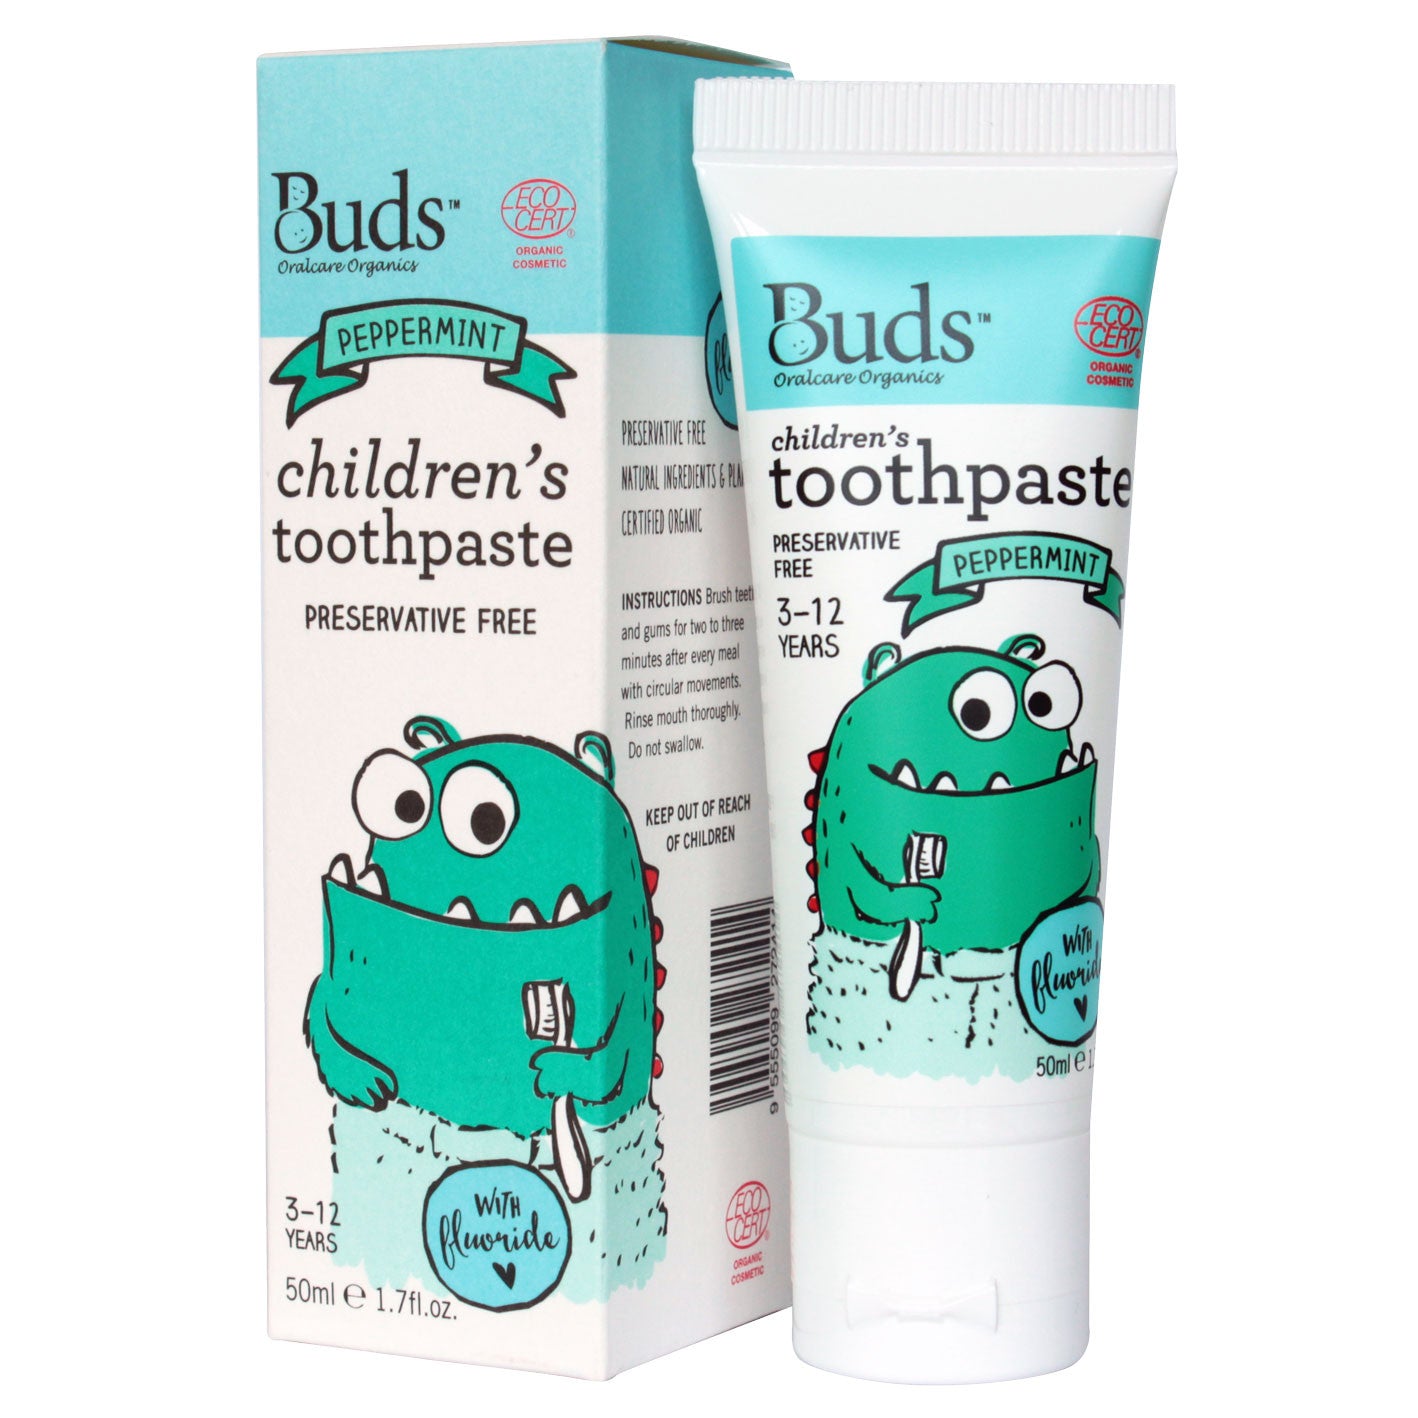 Buds Oralcare Organics Children's Toothpaste With Flouride 50ml For 3-12 Years Old